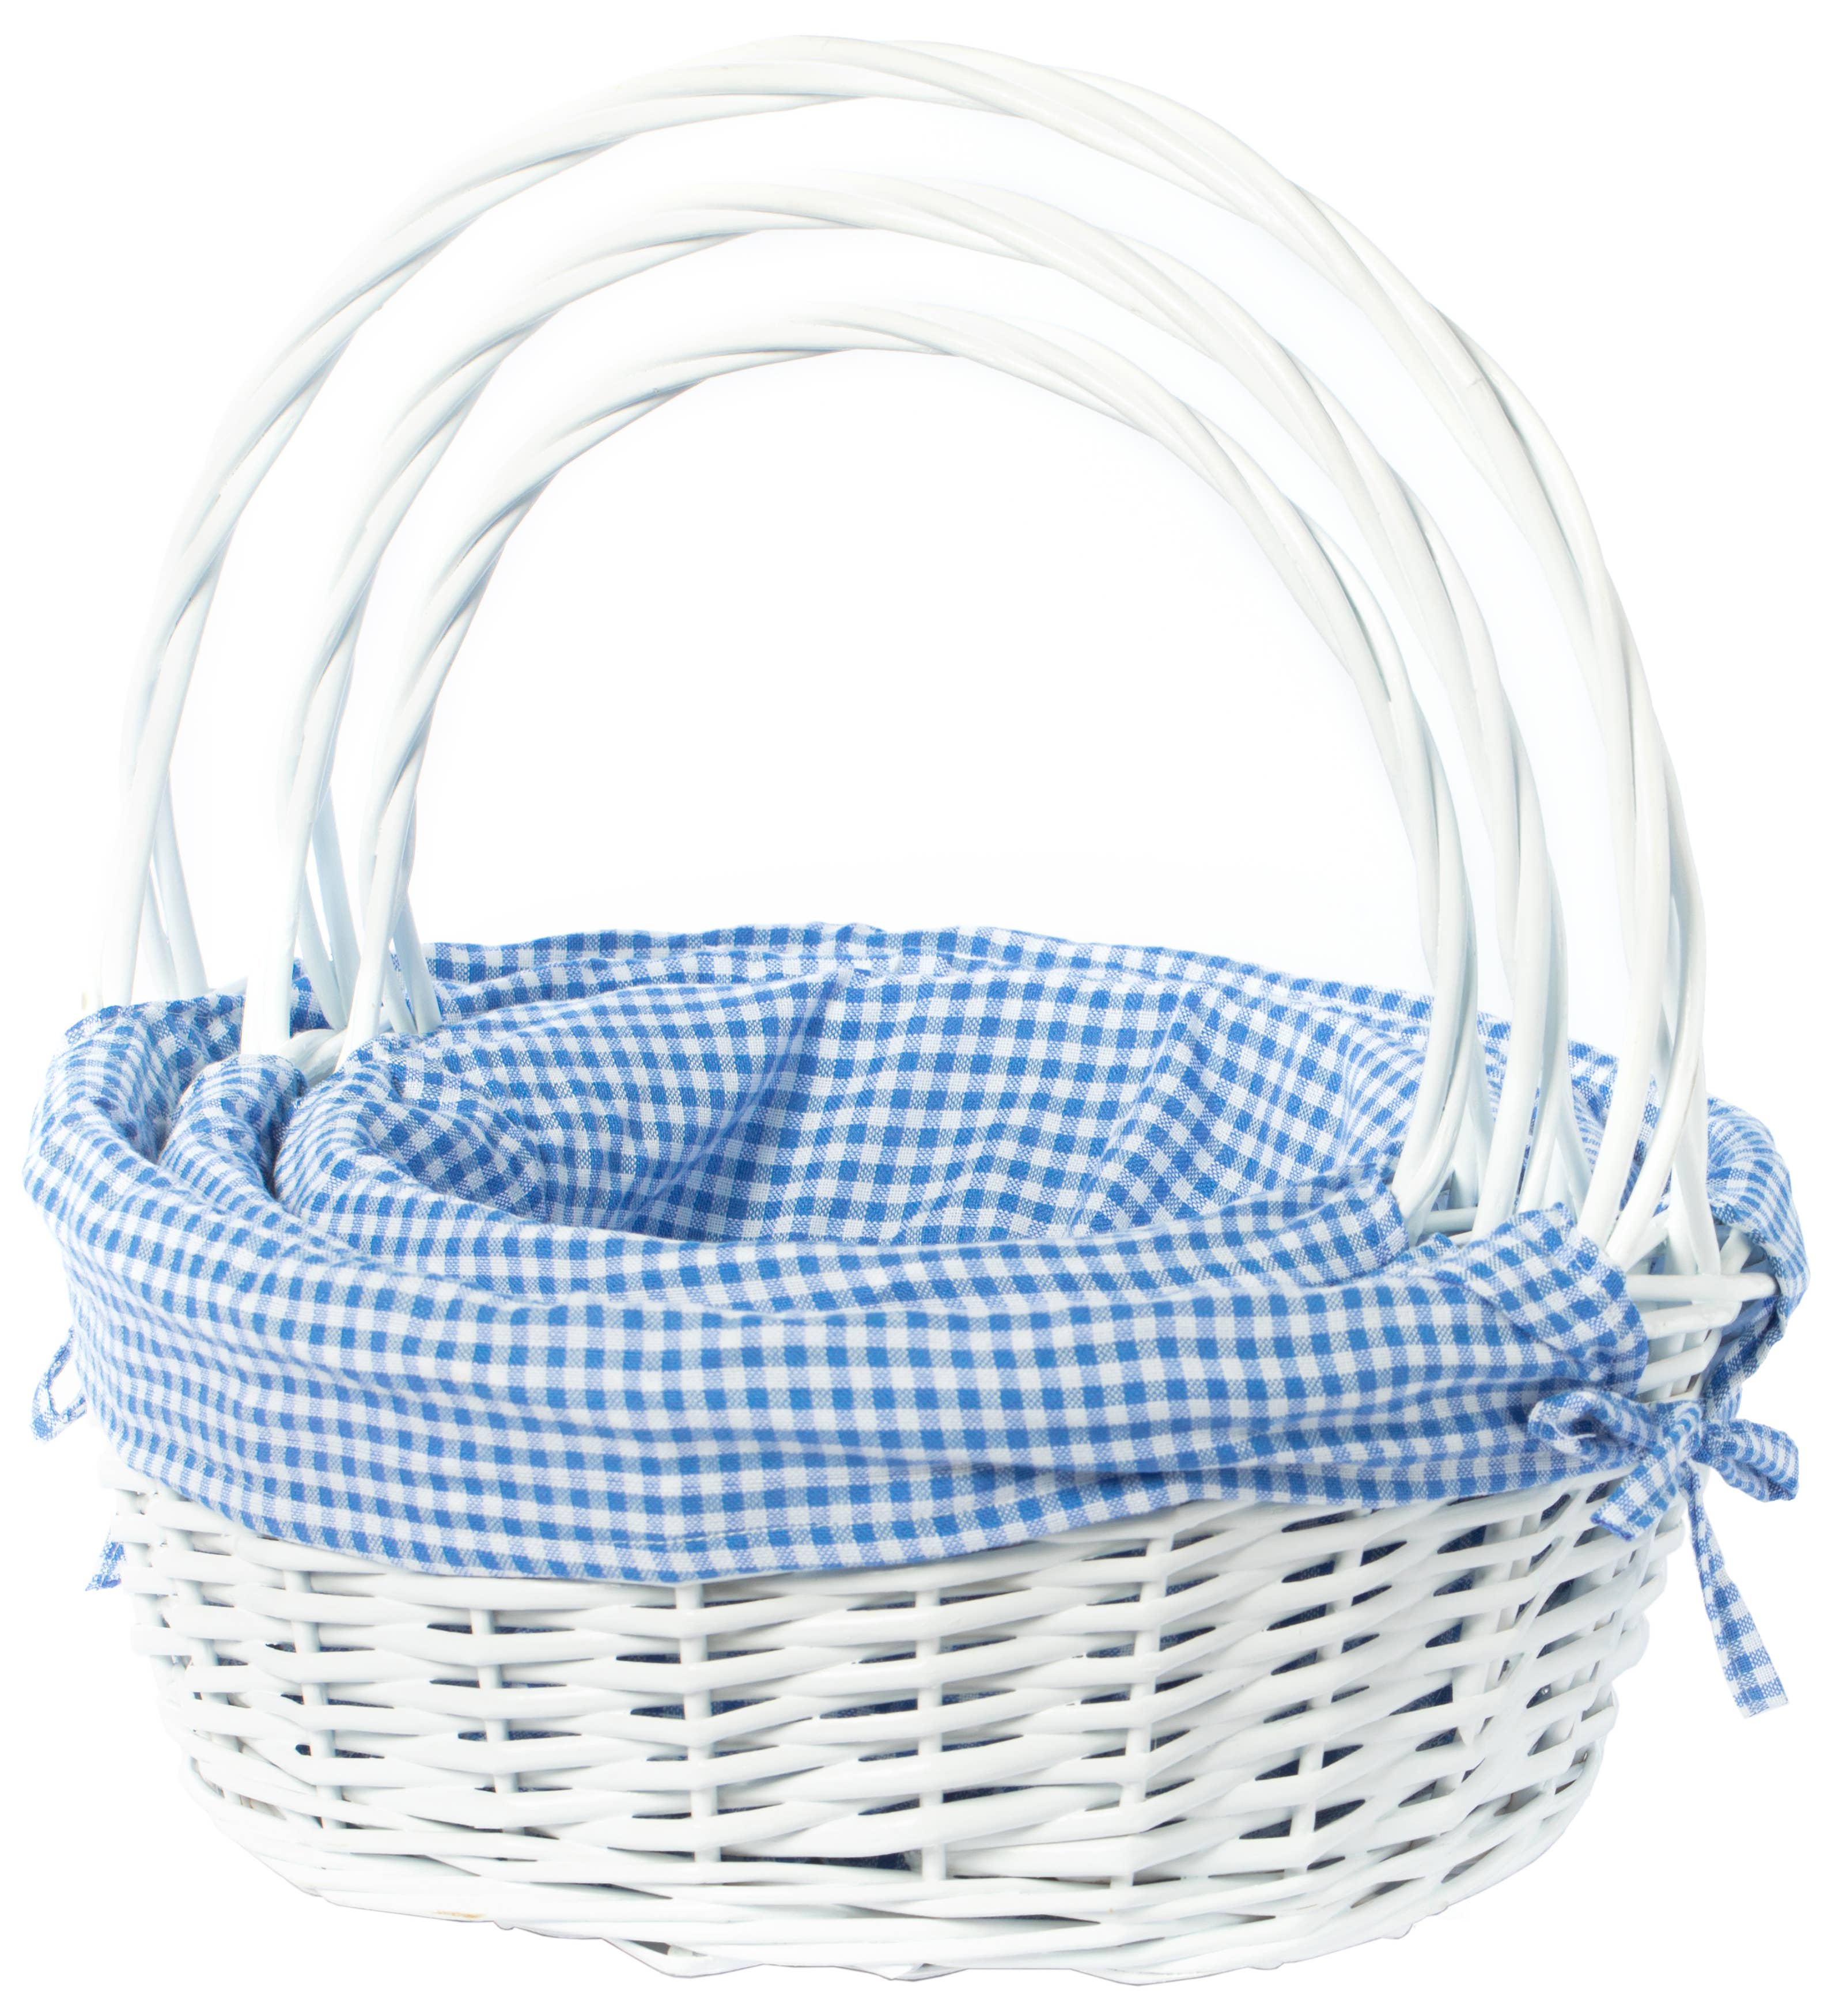 Wholesale Easter Basket Supplies: A Guide to Buying in Bulk